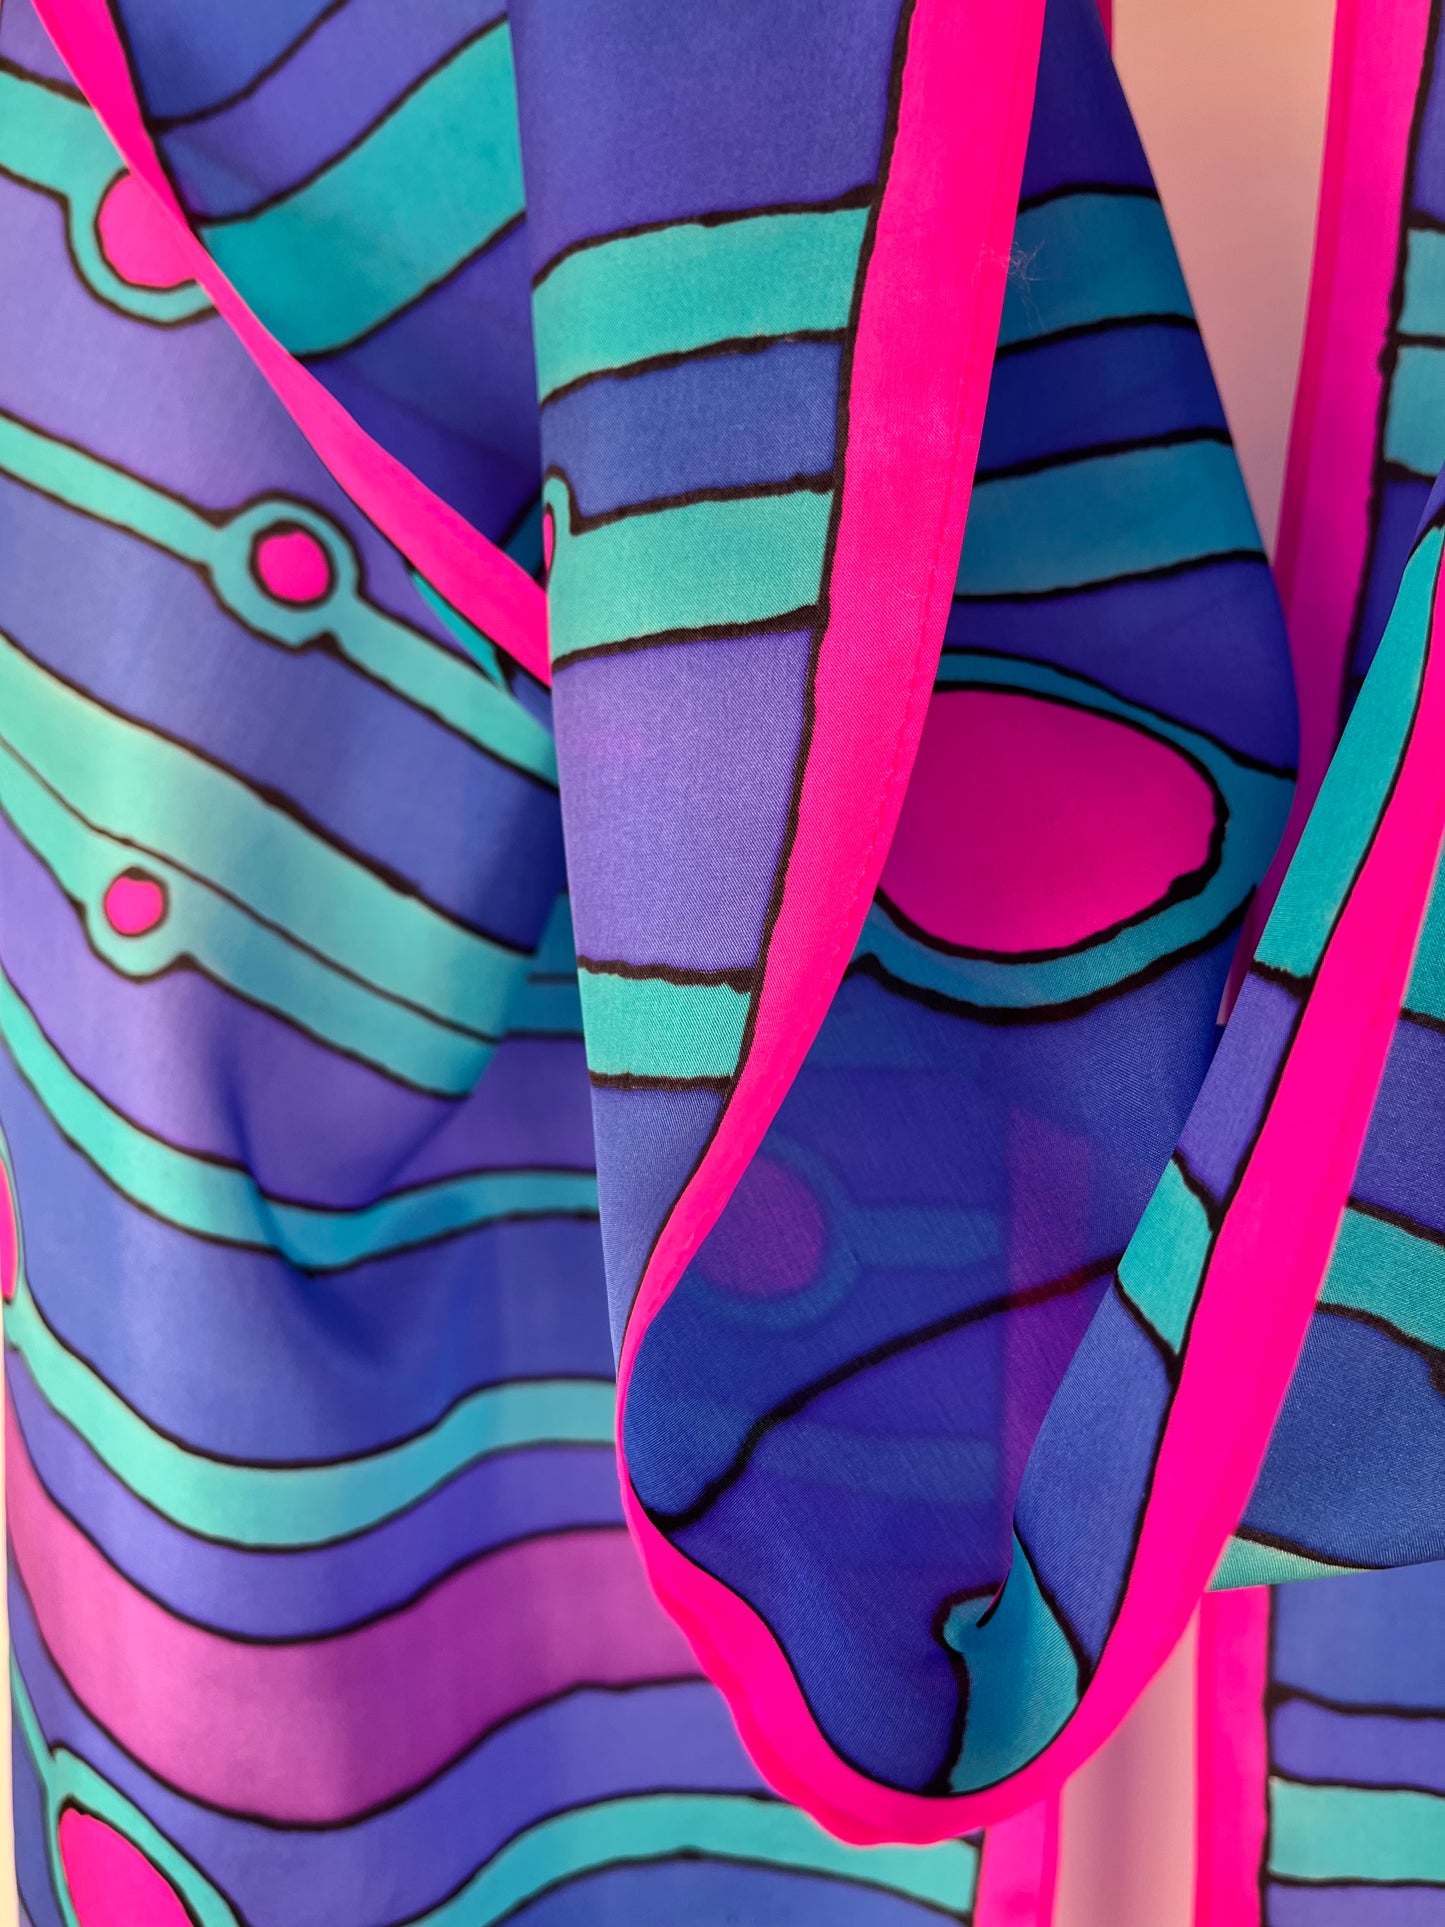 "Abstract Op Art" - Hand-dyed Silk Scarf - $130